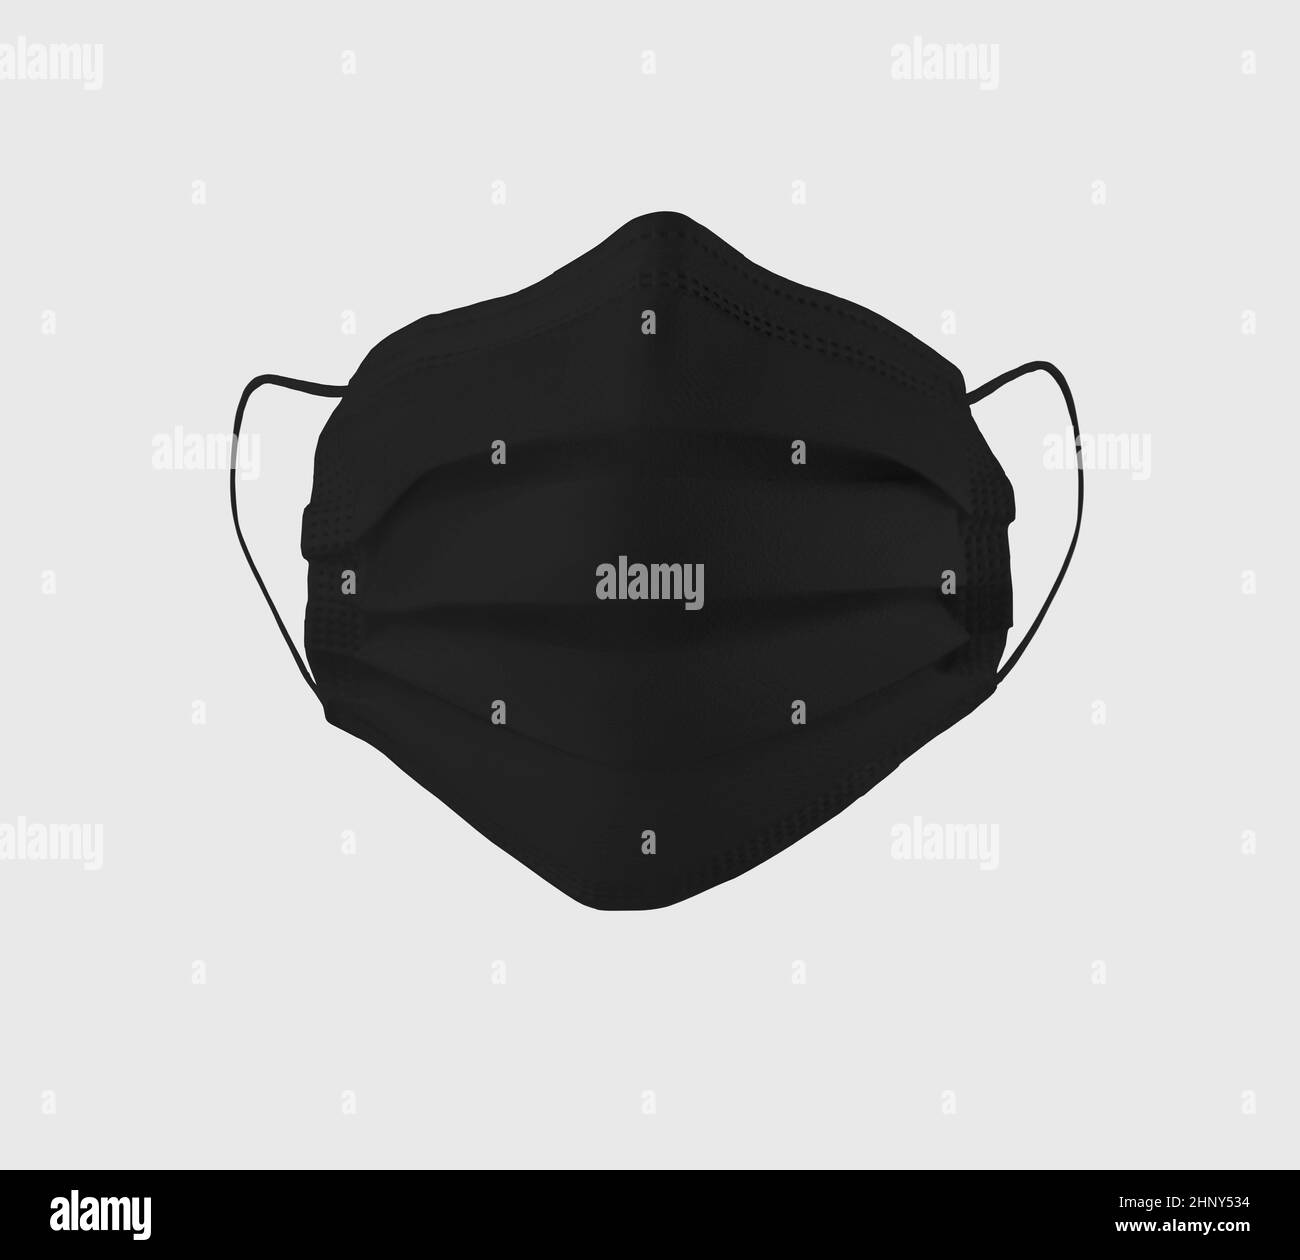 Black surgical mask mockup, 3D rendering, front view, respirator with ear loops, isolated on background. Uniform template for branding, protection fro Stock Photo